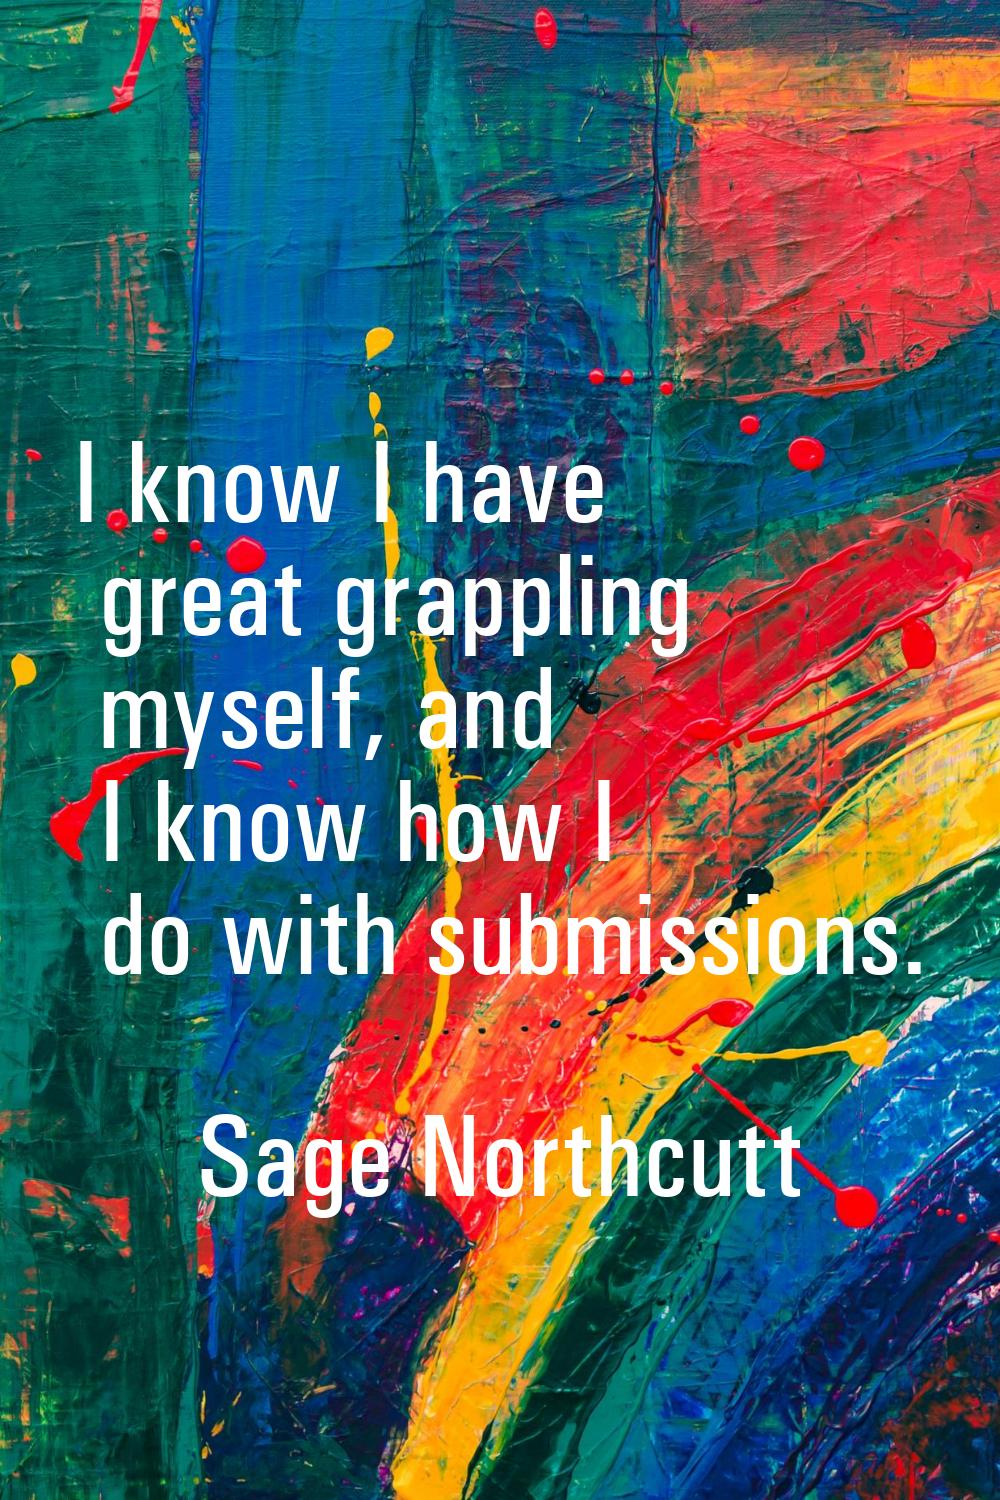 I know I have great grappling myself, and I know how I do with submissions.